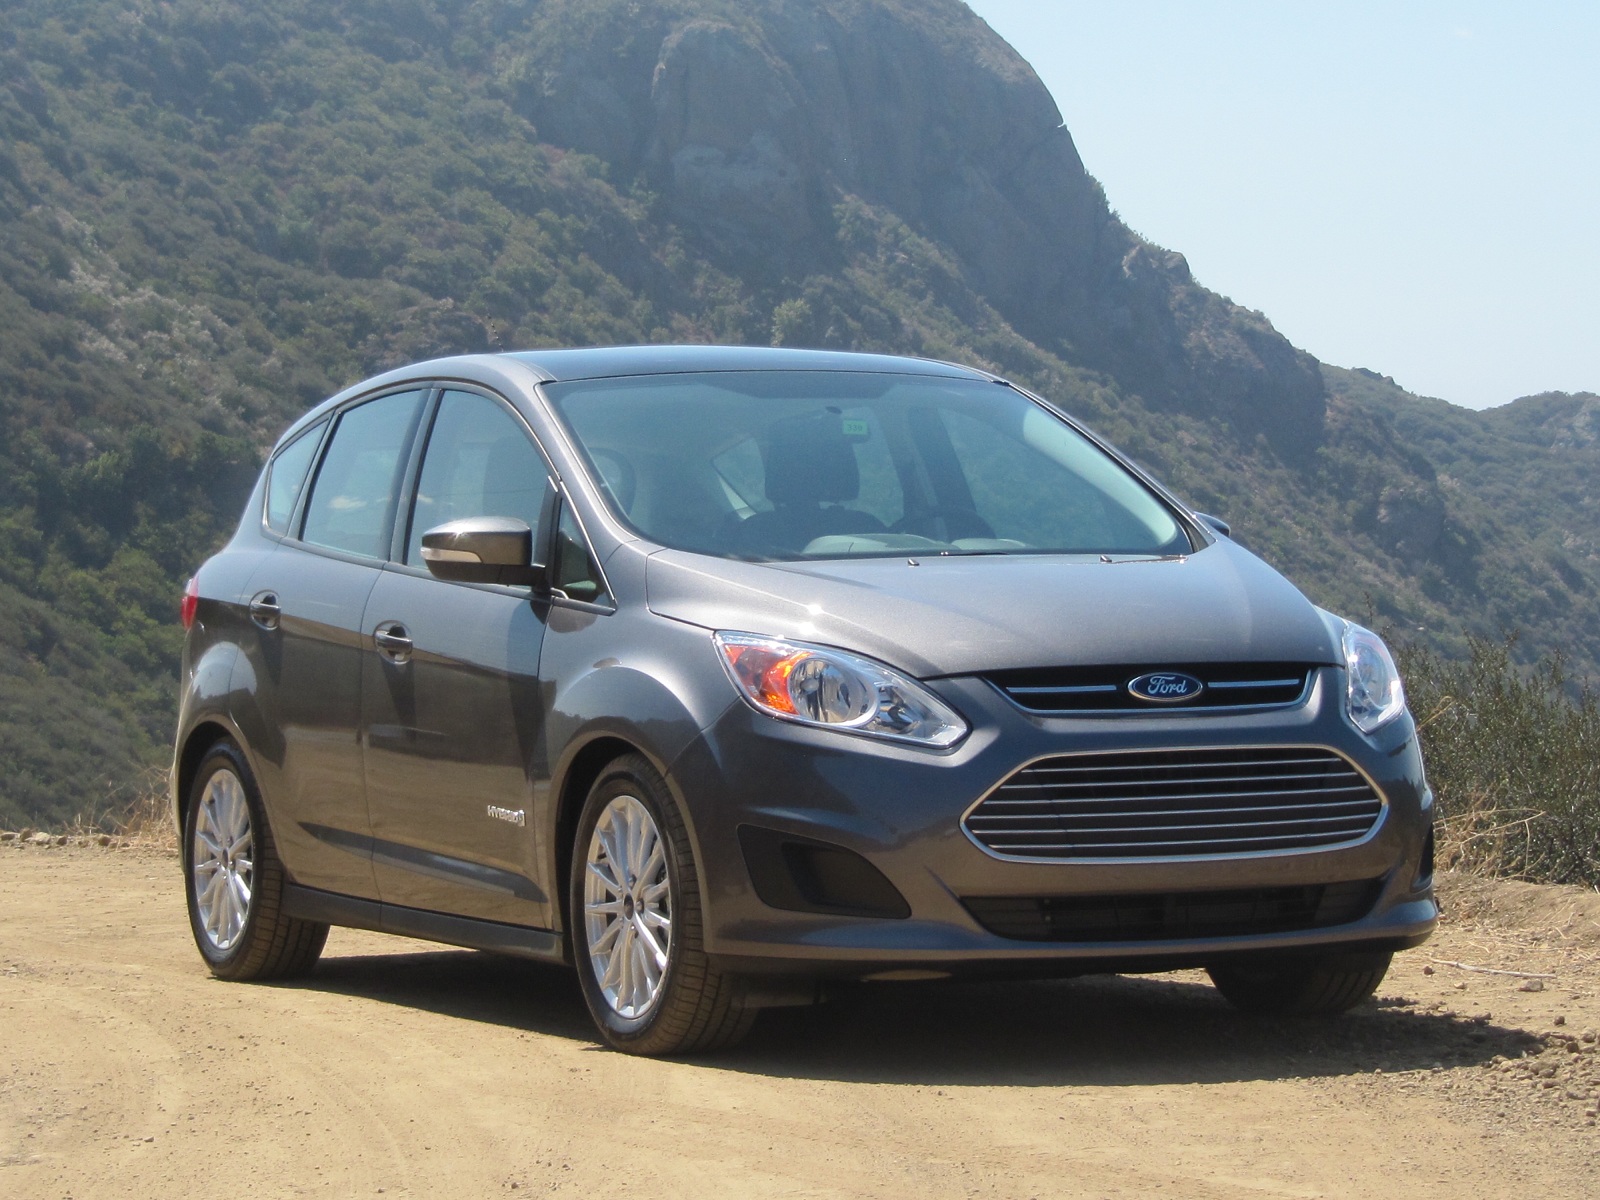 2013 Ford C-Max Hybrid: First Drive